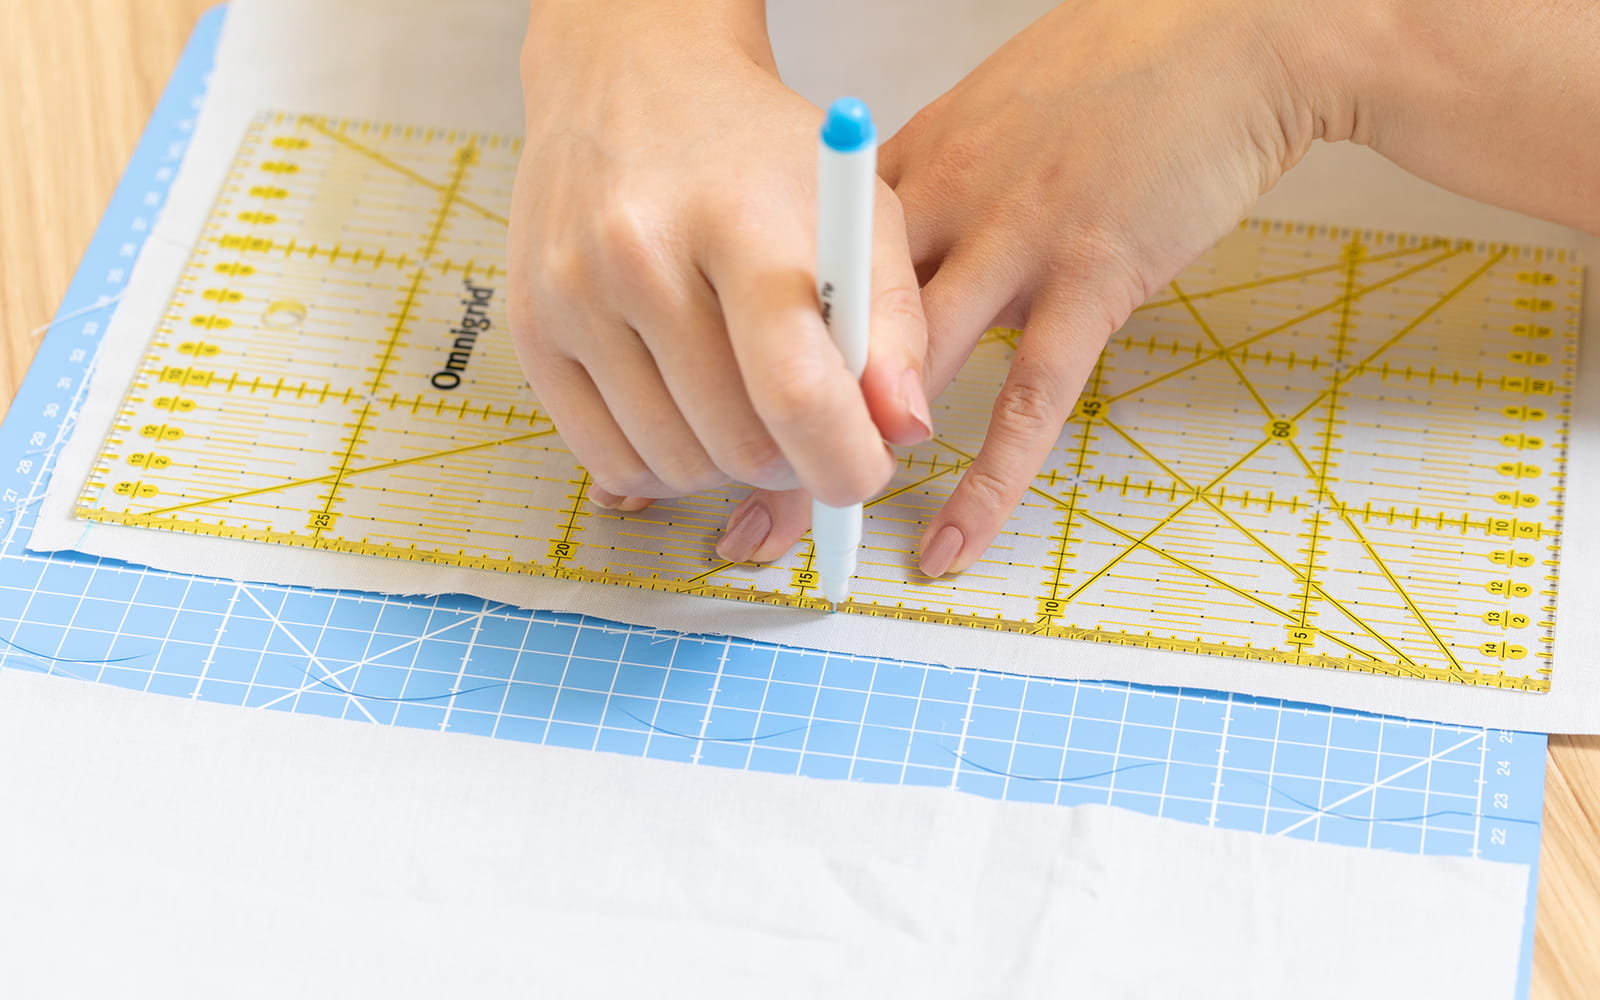 Hands using sewing ruler to mark out seam allowance